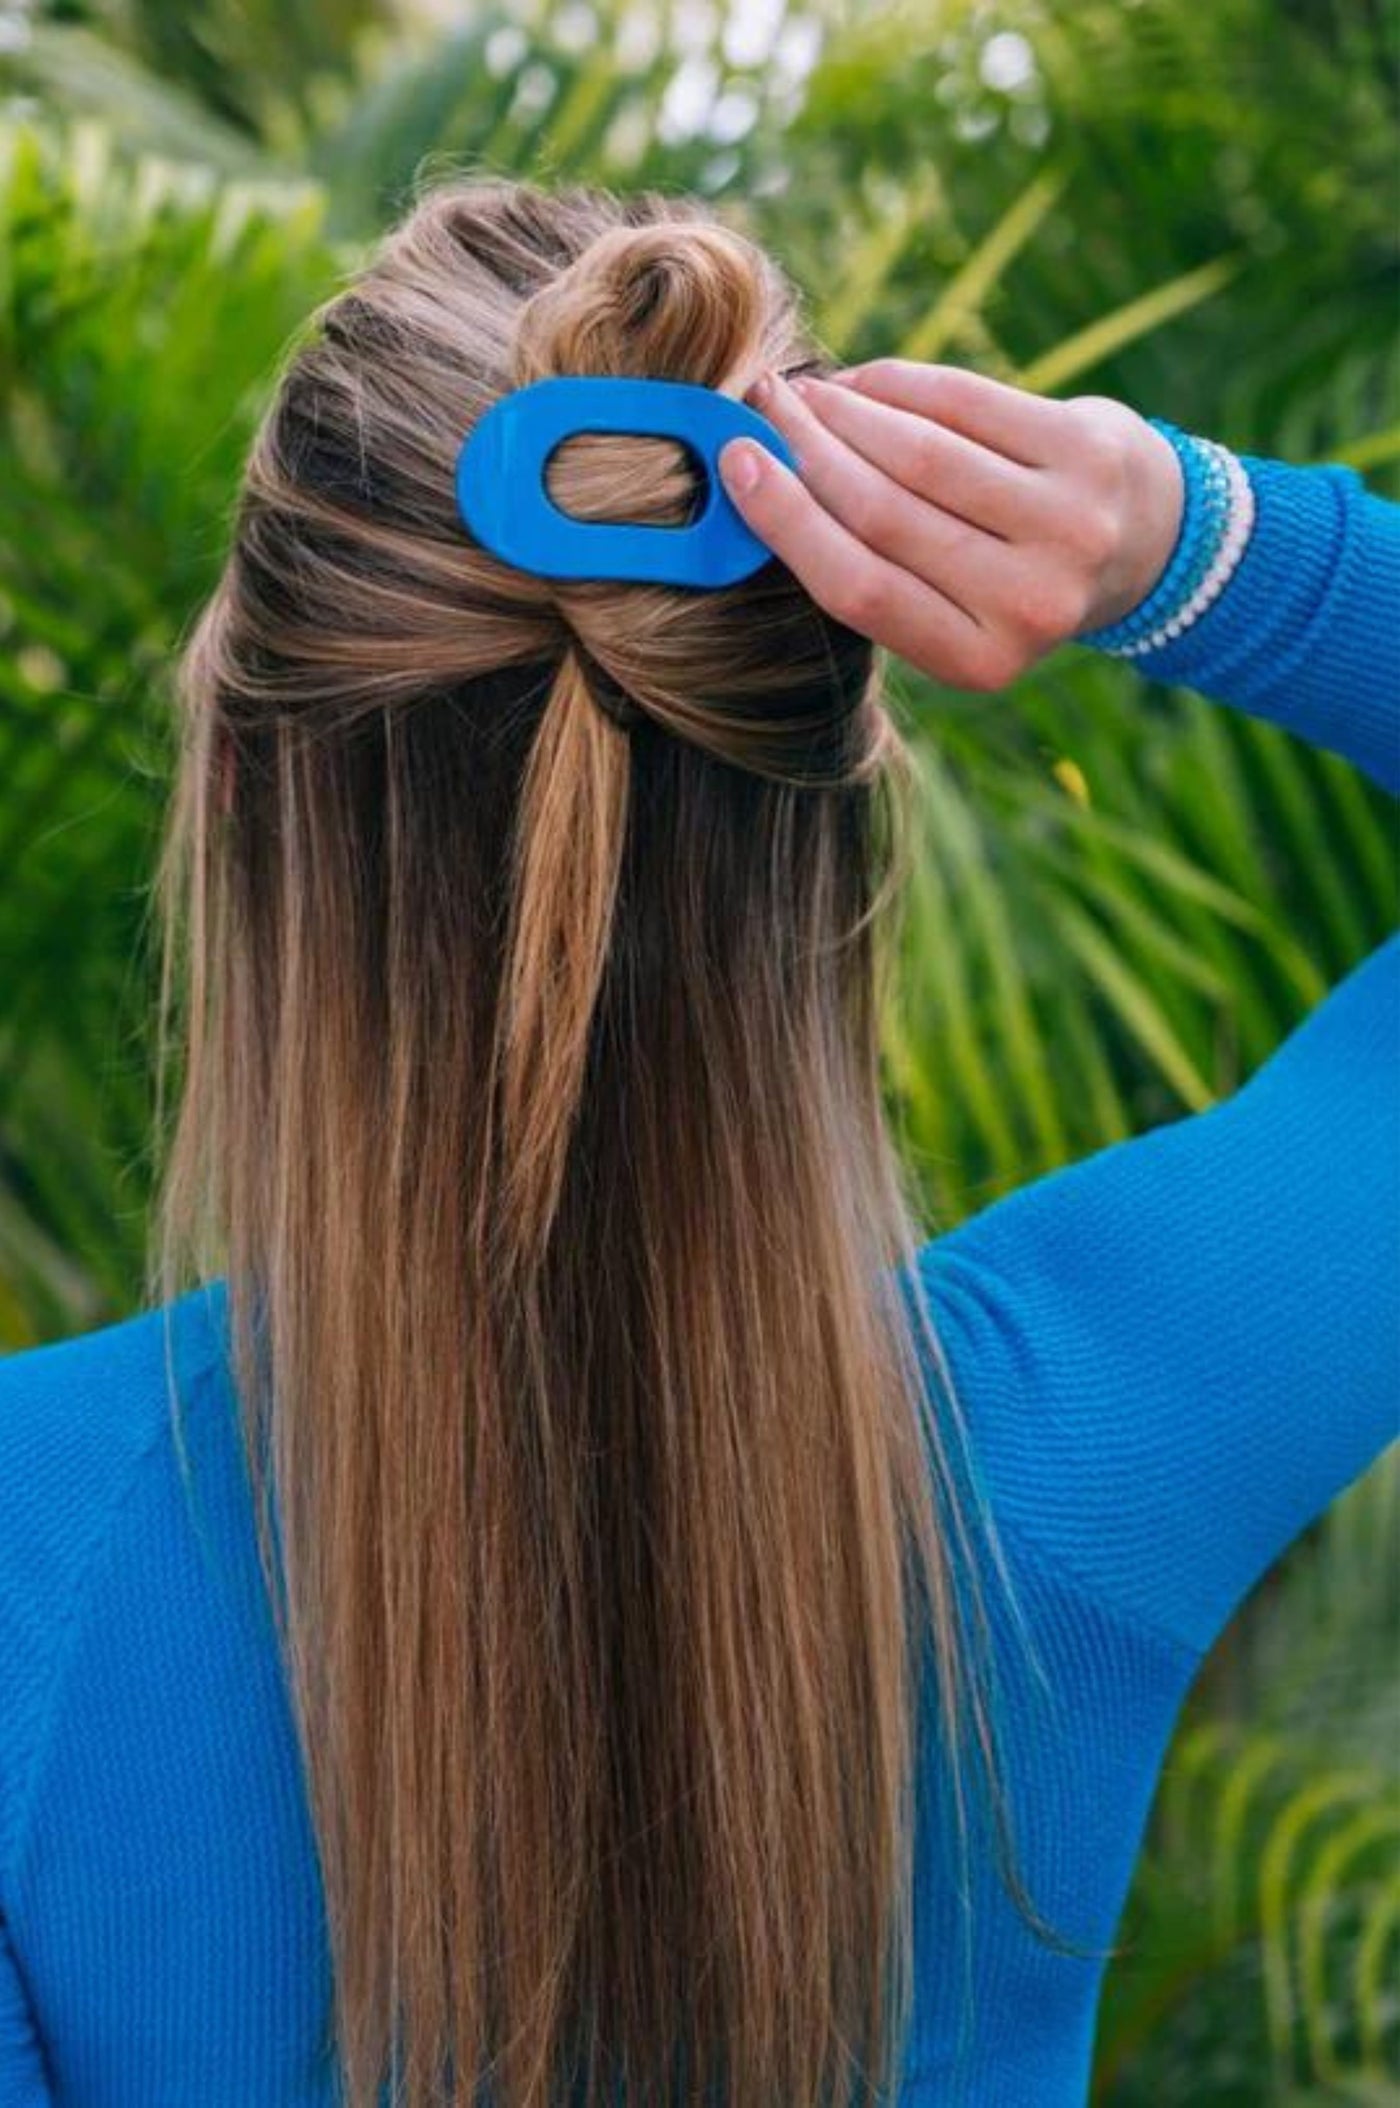 Small Flat Round Hair Clip by Teleties